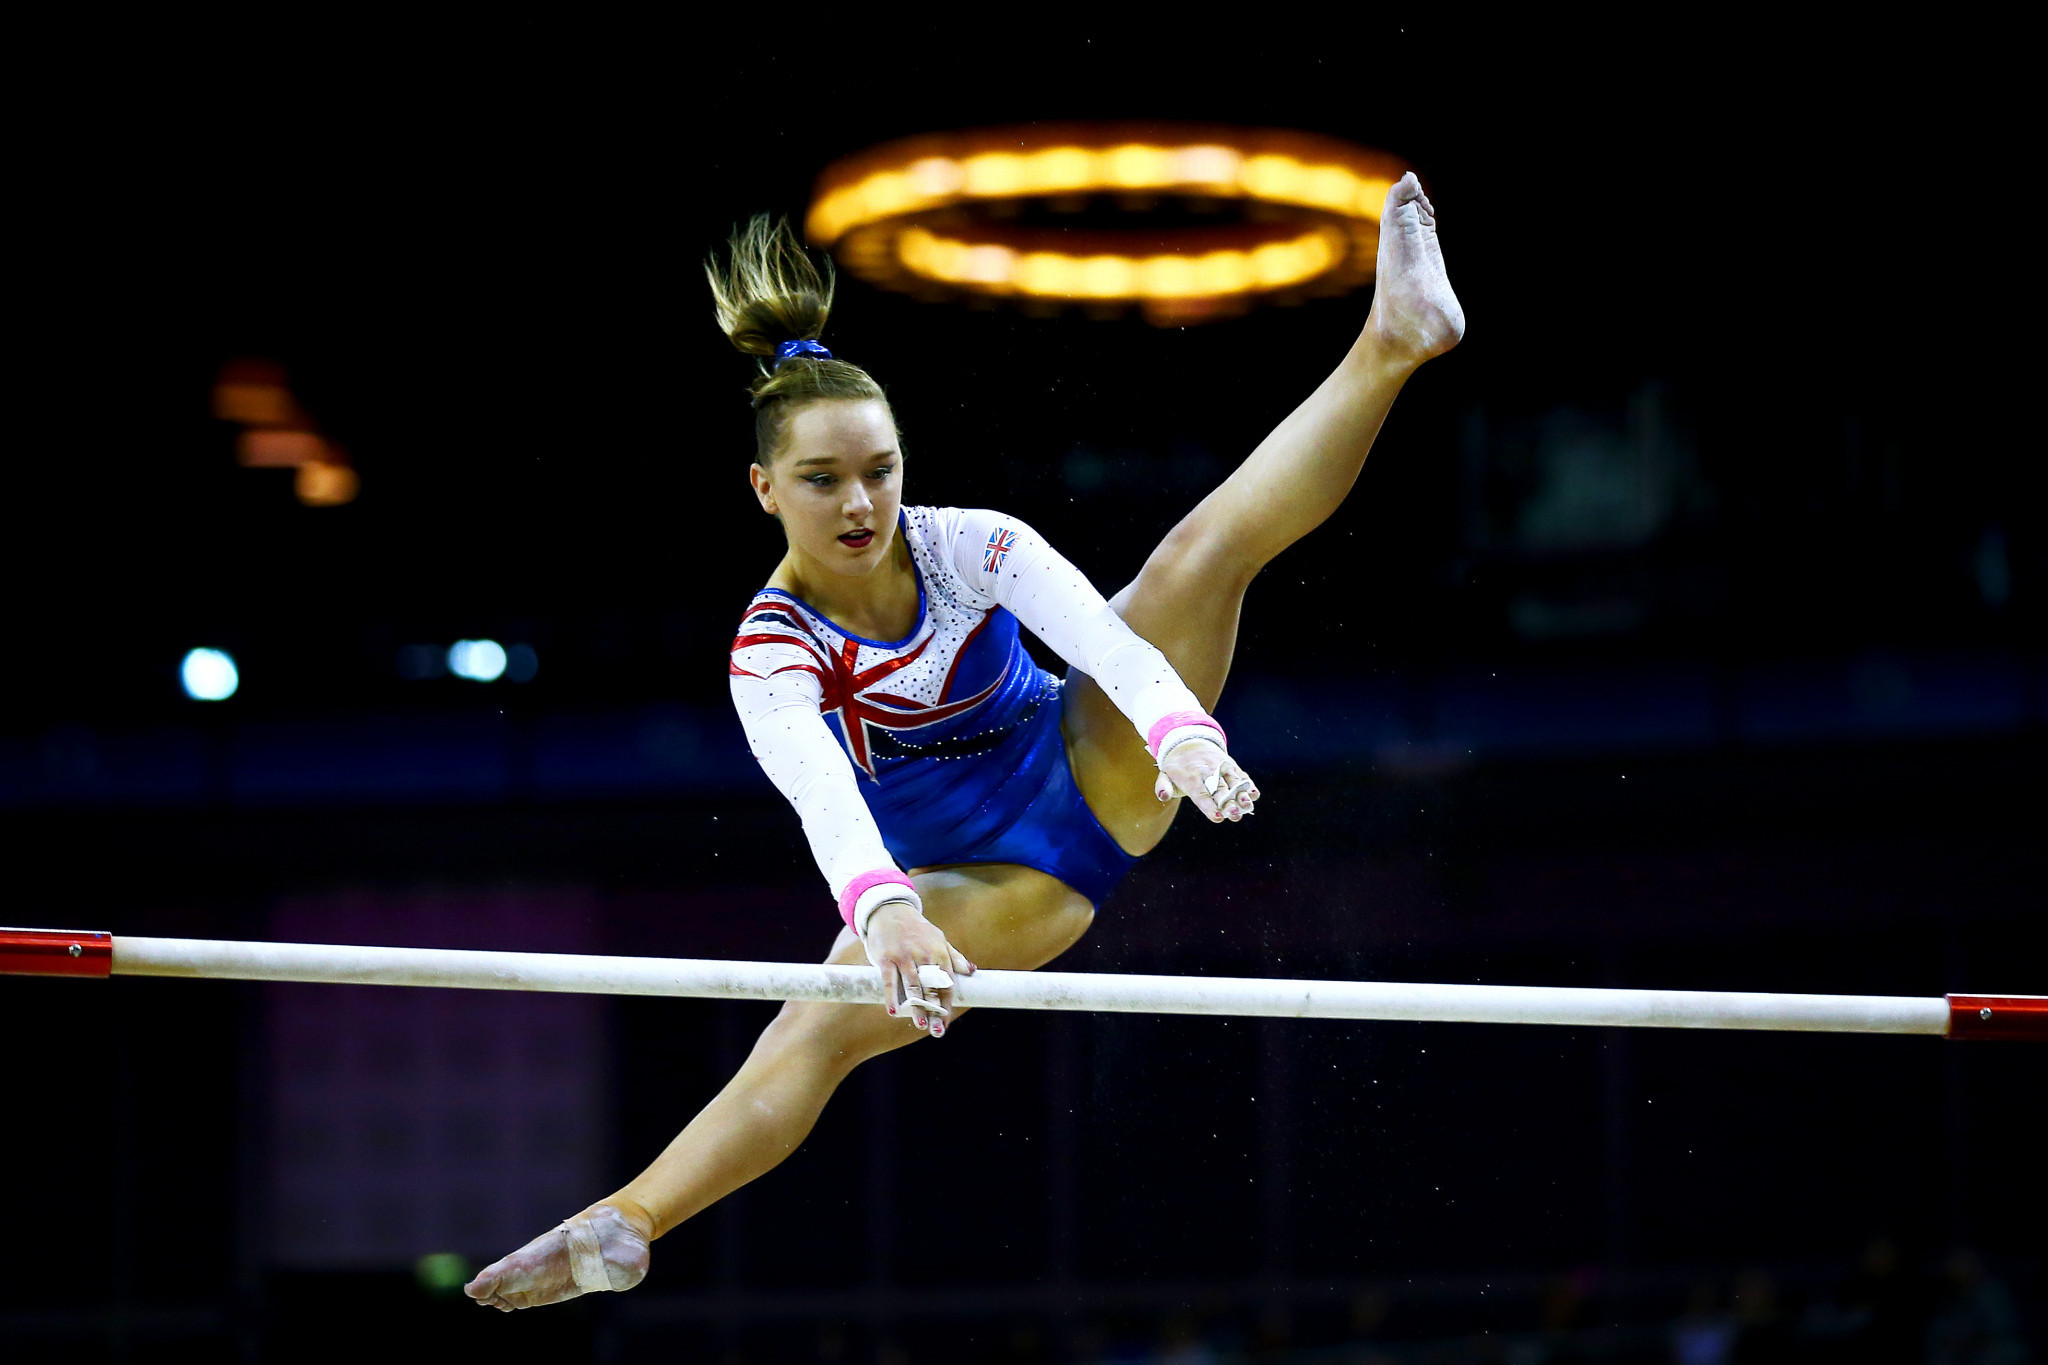 Retired gymnast Amy Tinkler quit the sport after lodging a formal complaint over abuse allegations ©Getty Images